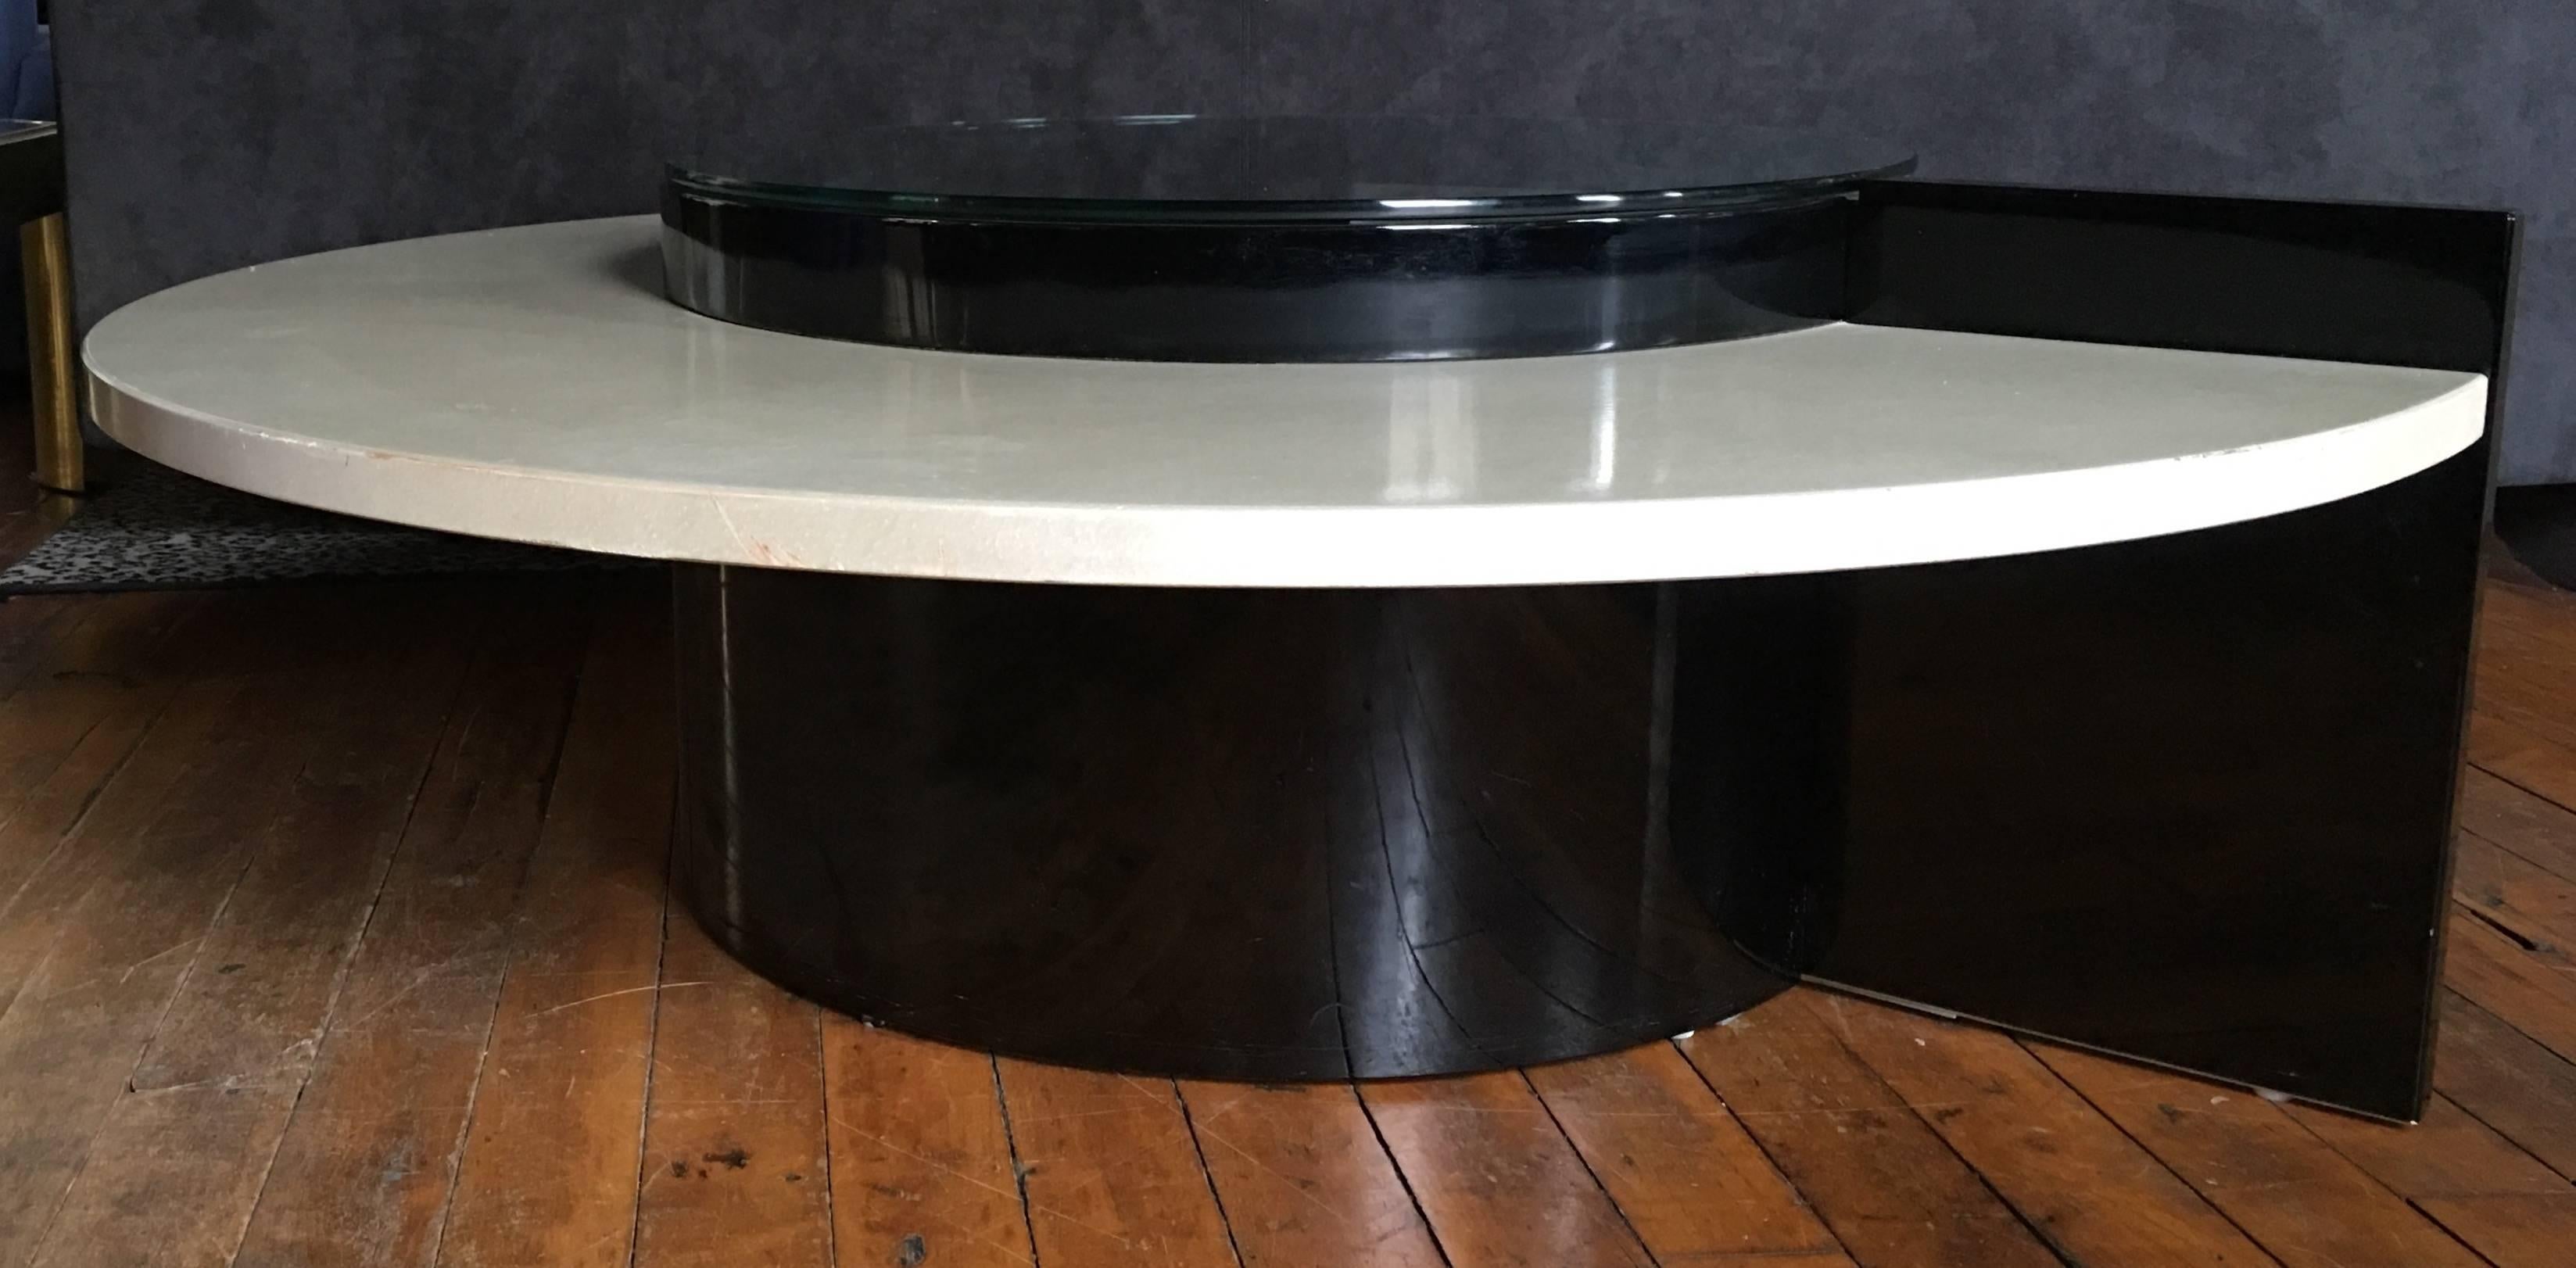 Late 20th Century Modern Round Cocktail Table by Rougier